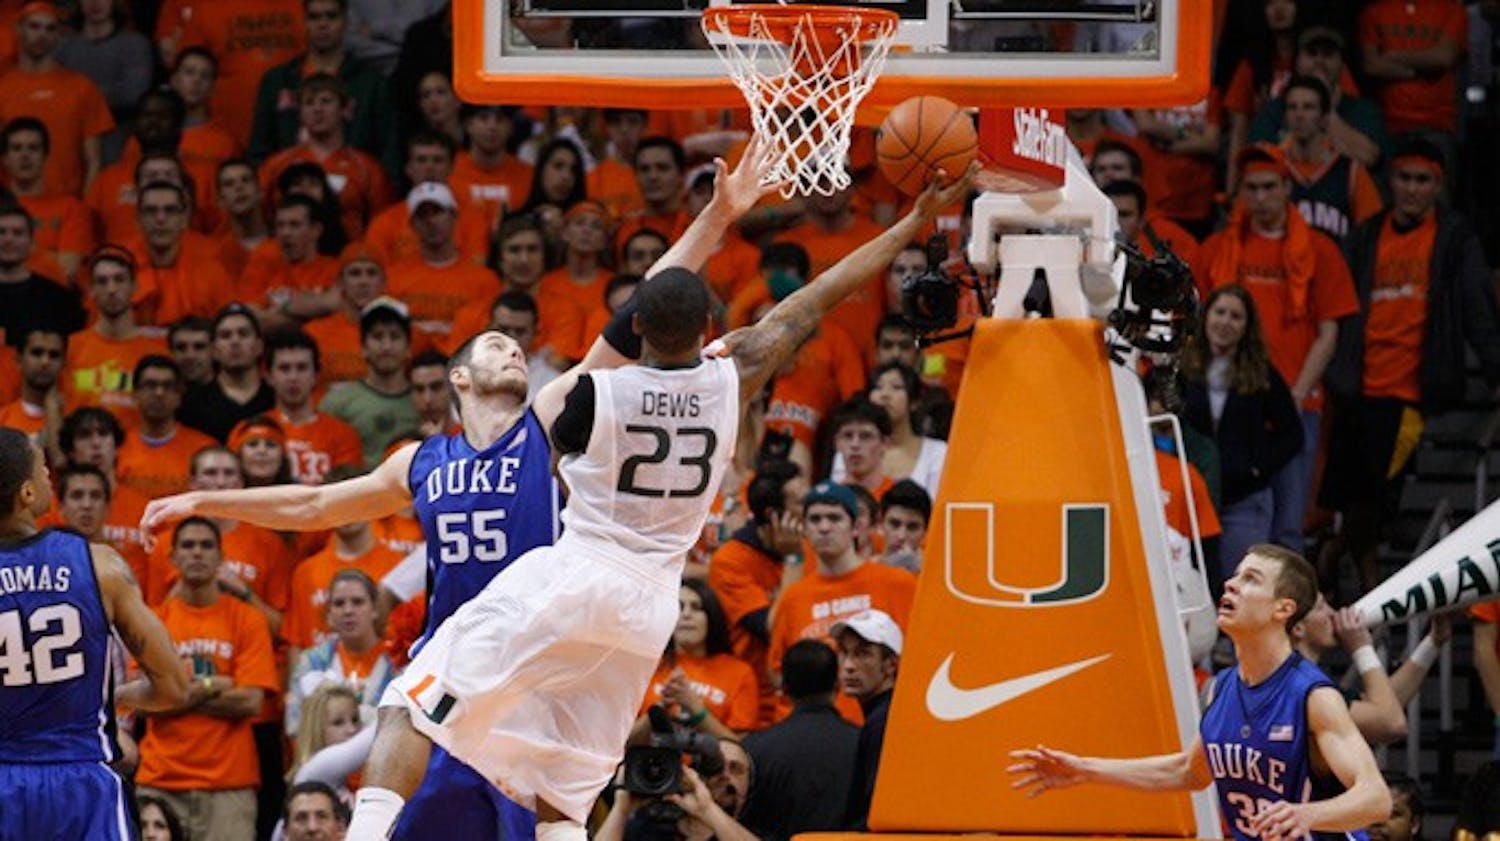 Senior Brian Zoubek goes up for a block against Miami’s driving guard, James Dews, during Duke’s seven-point escape at the BankUnited Center in Coral Gables, Fla.